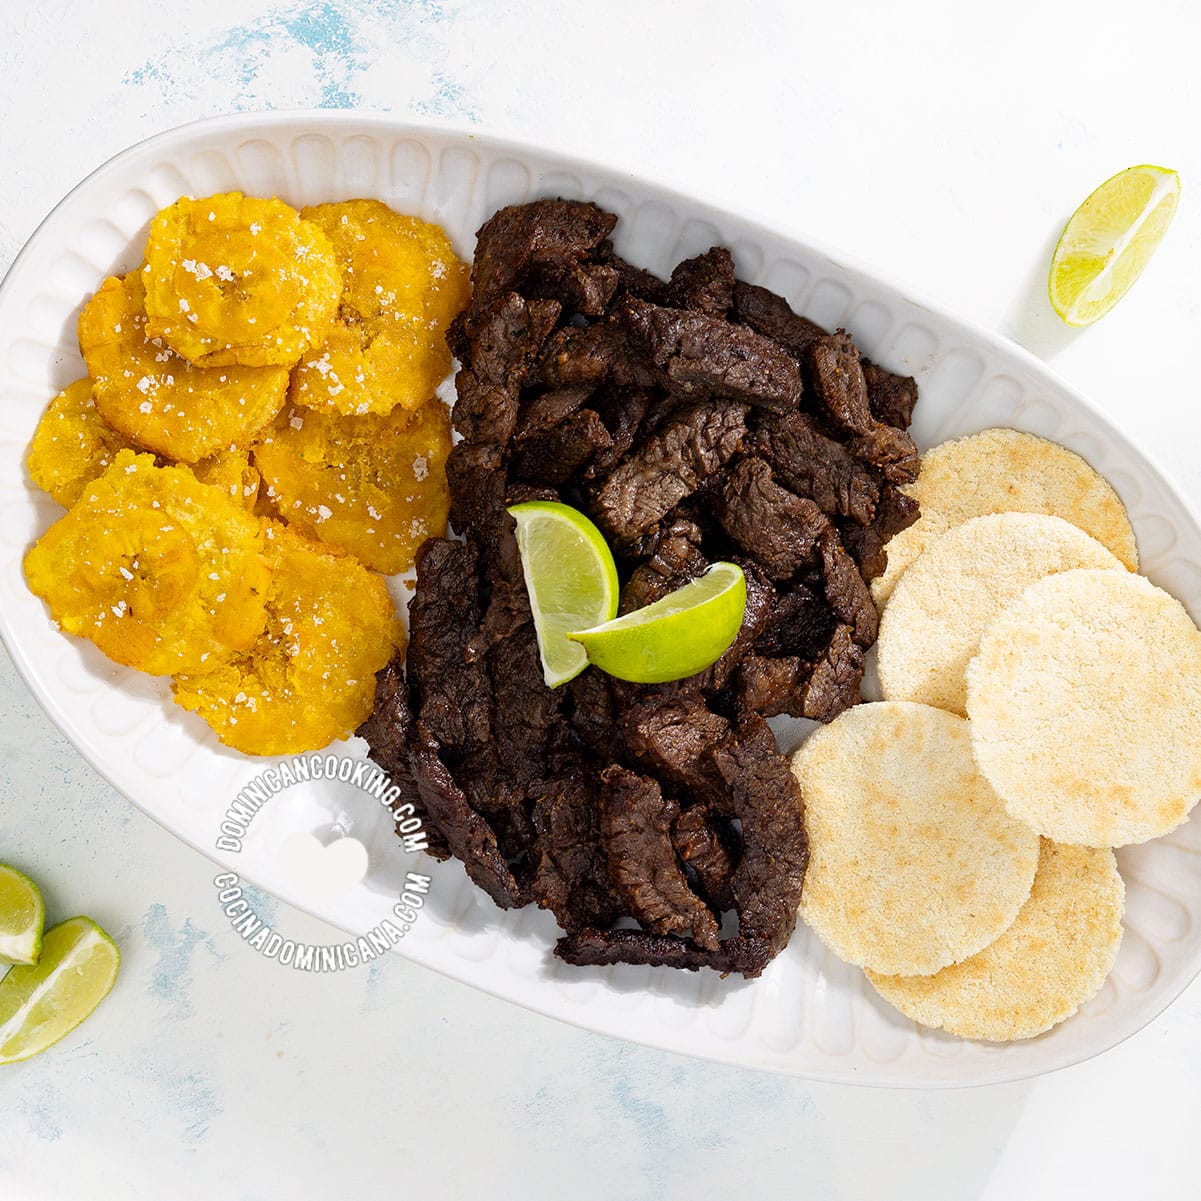 Carnita frita, res frita or puerco frito (Dominican fried beef or fried pork).